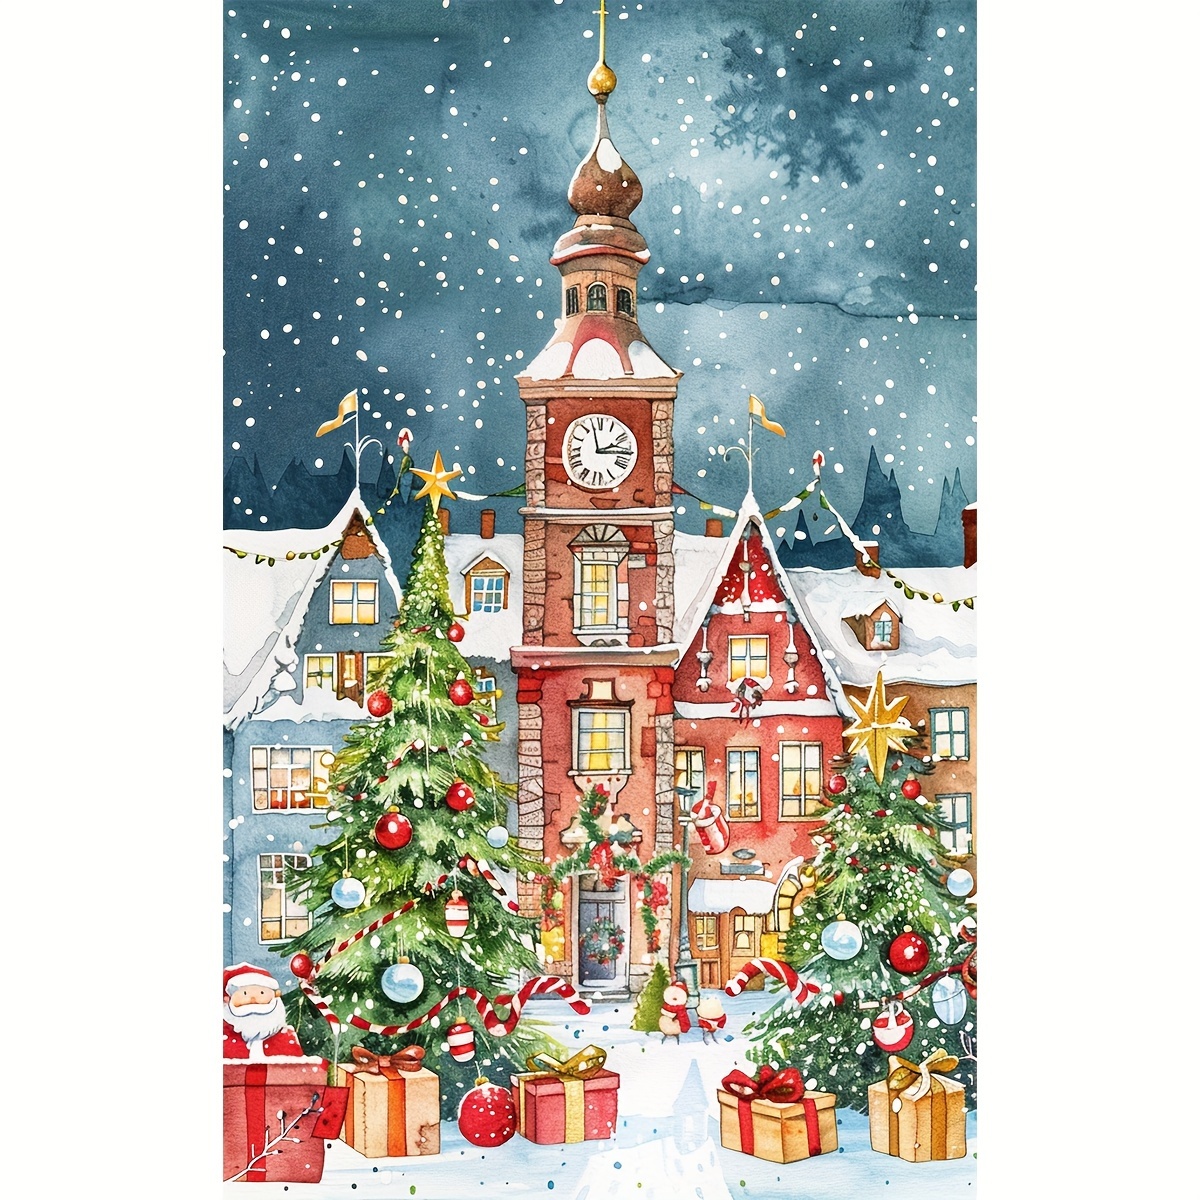 

Christmas Town Cross Stitch Kit - 1pc, Festive School Scene Embroidery Set With Printed Pattern, Fabric, Thread, Needle & Instructions - Holiday Wall Decor 40x60cm / 15.7x23.6in